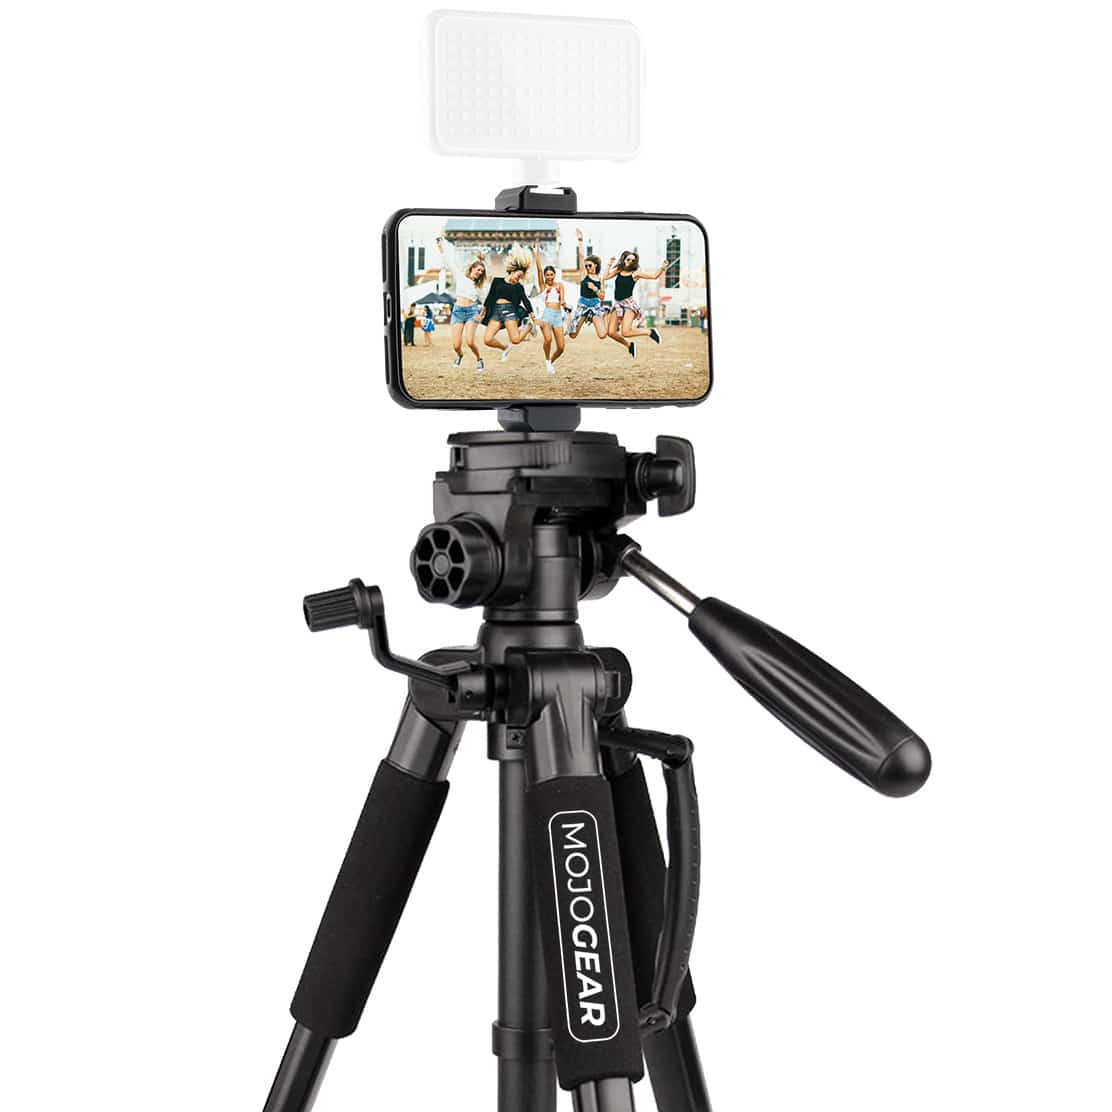 MOJOGEAR 140cm Tripod with Premium Phone Clamp